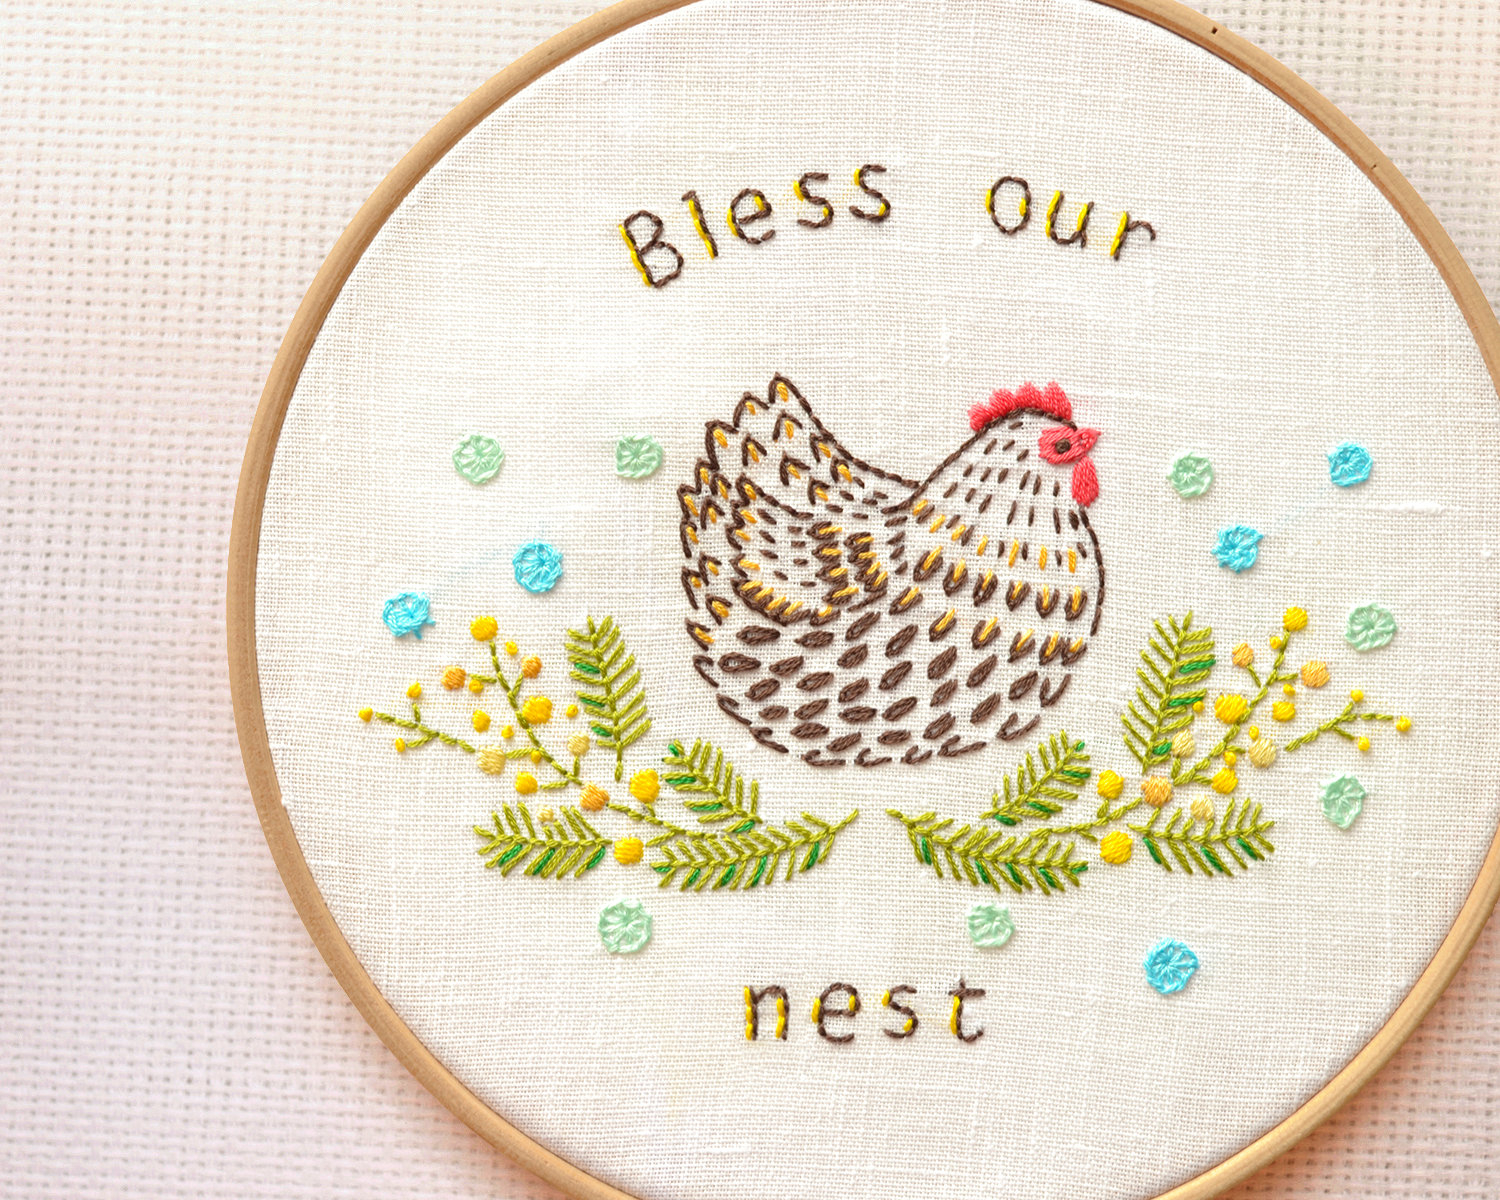 Chicken Embroidery Patterns Hand Embroidery Patterns Pdf Chicken Decor Bless Our Nest Easter Embroidery Family Simbol Naiveneedle